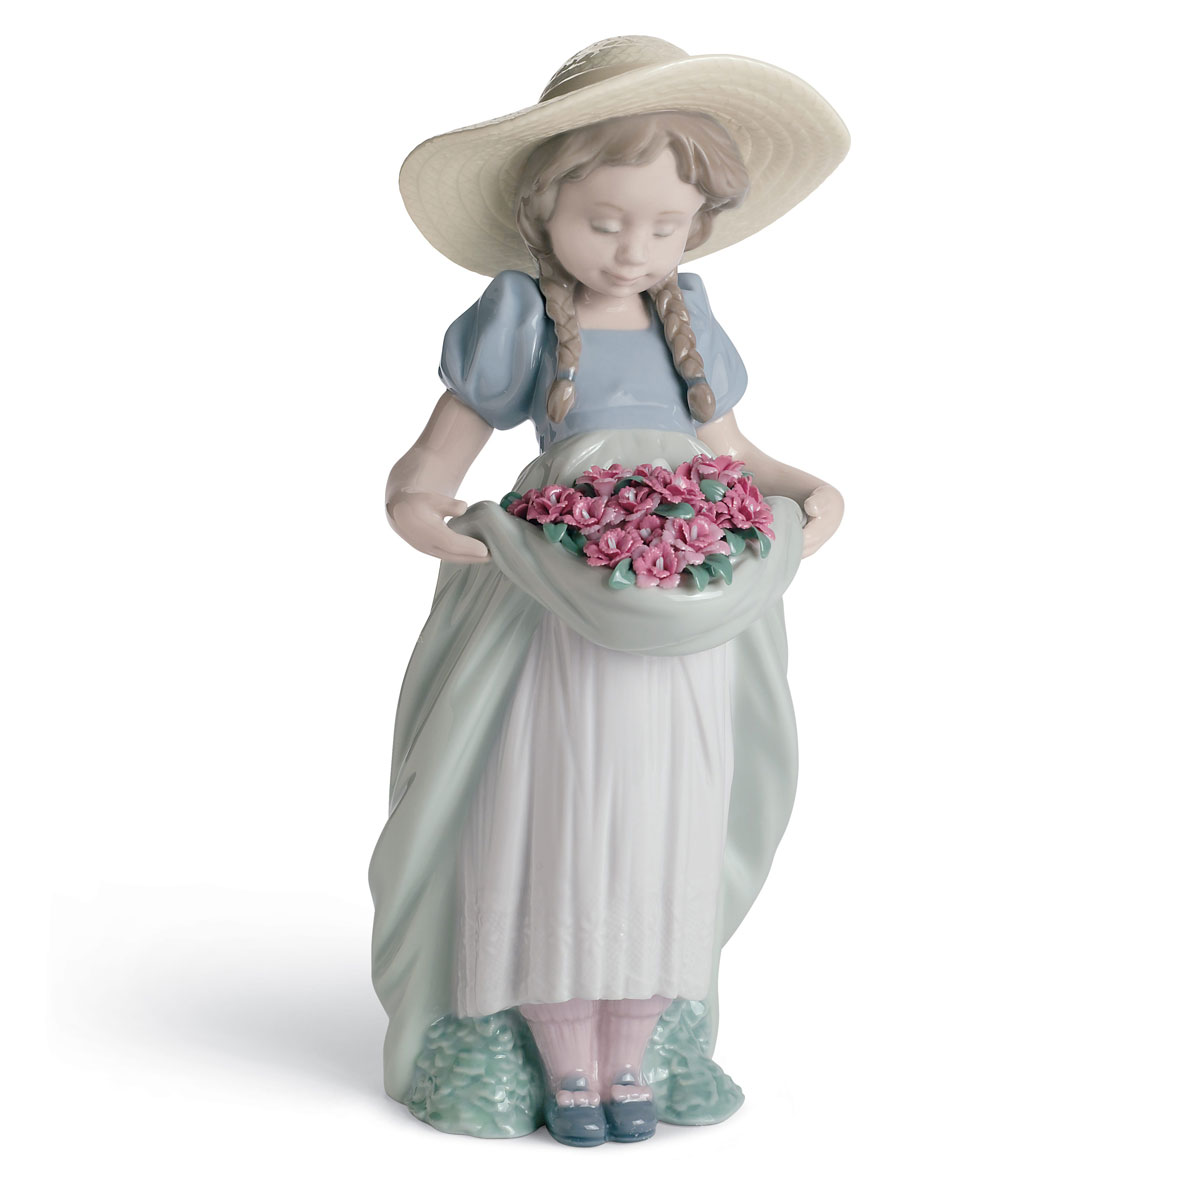 Lladro Classic Sculpture, Bountiful Blossoms Girl With Carnations Figurine